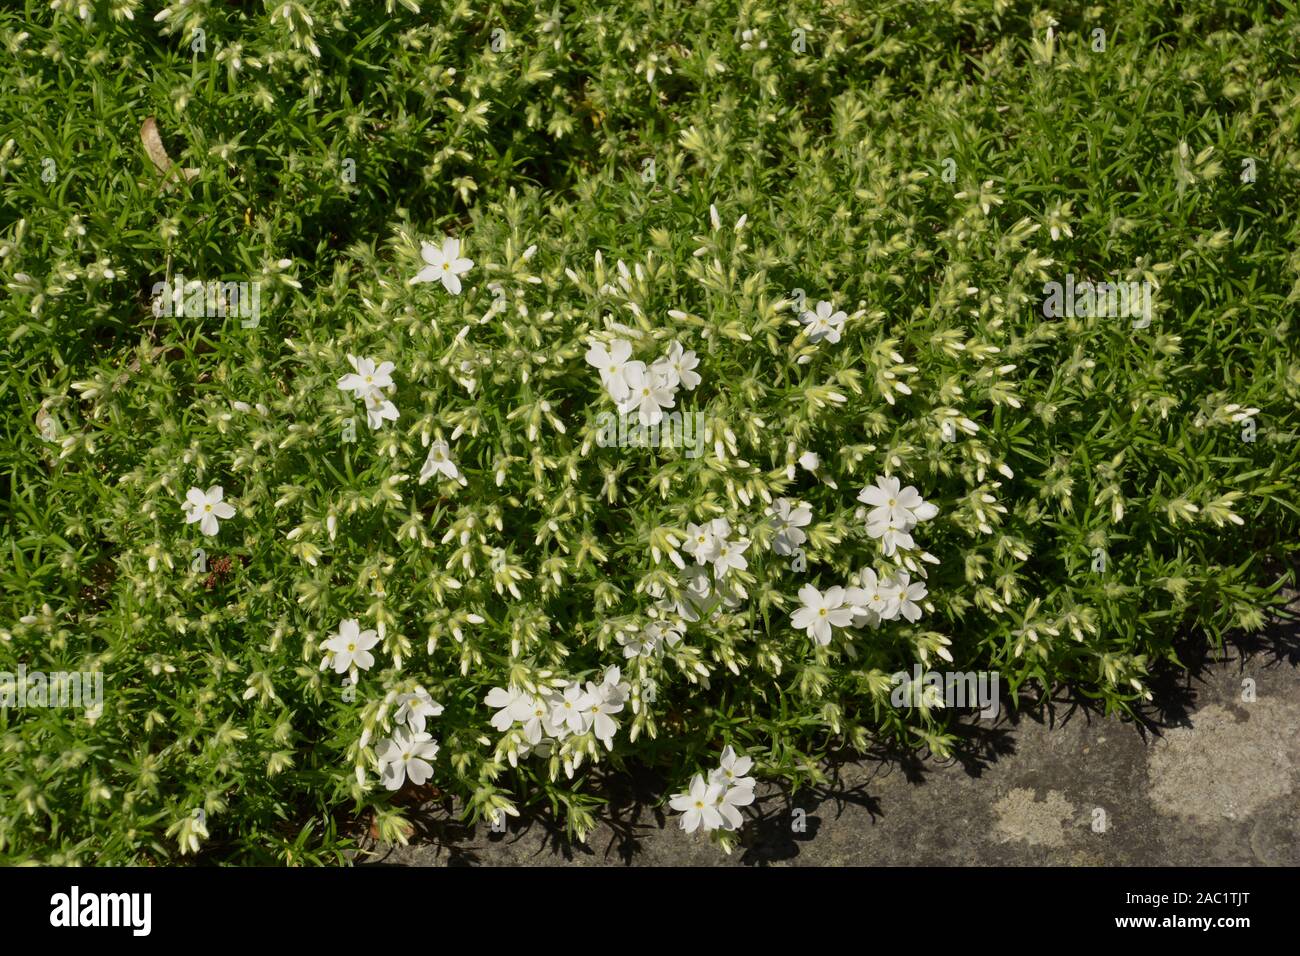 creeping phlox or phlox subulata with new shoots in early spring, white delight phlox in bloom Stock Photo